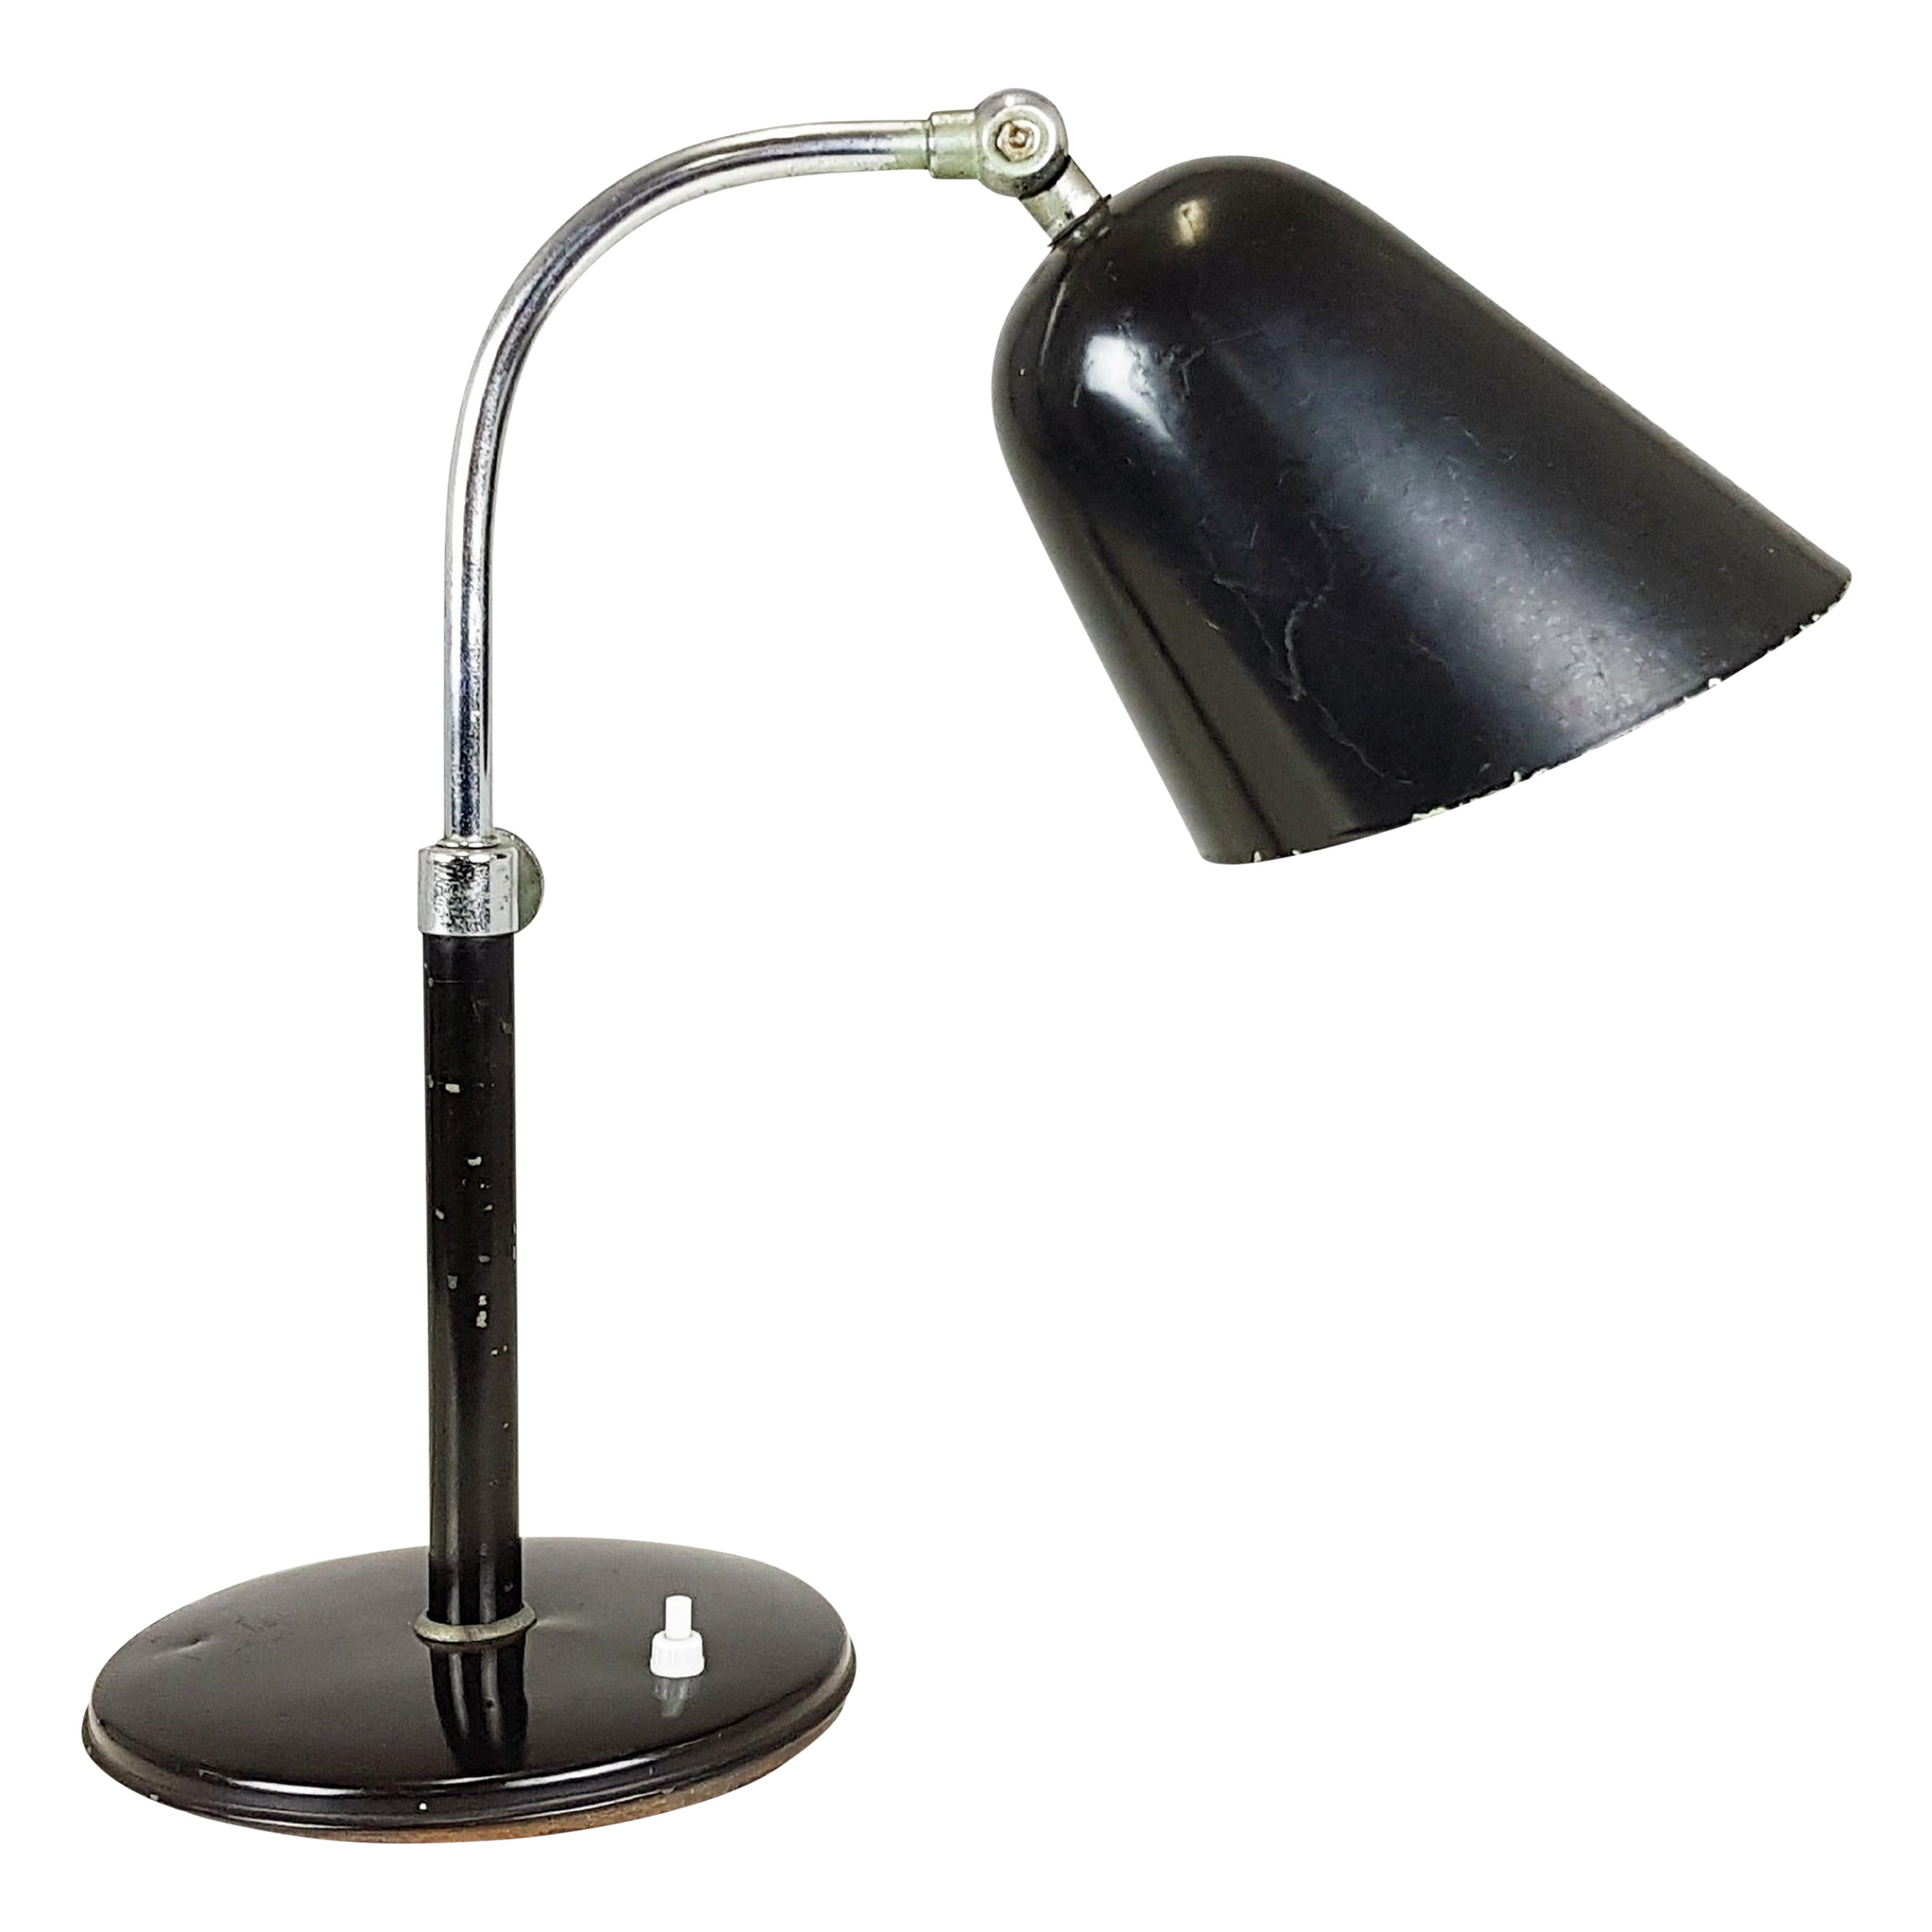 Rare Chrome Plated & Black Painted Metal Rationalist Table Lamp by I. Gardella For Sale